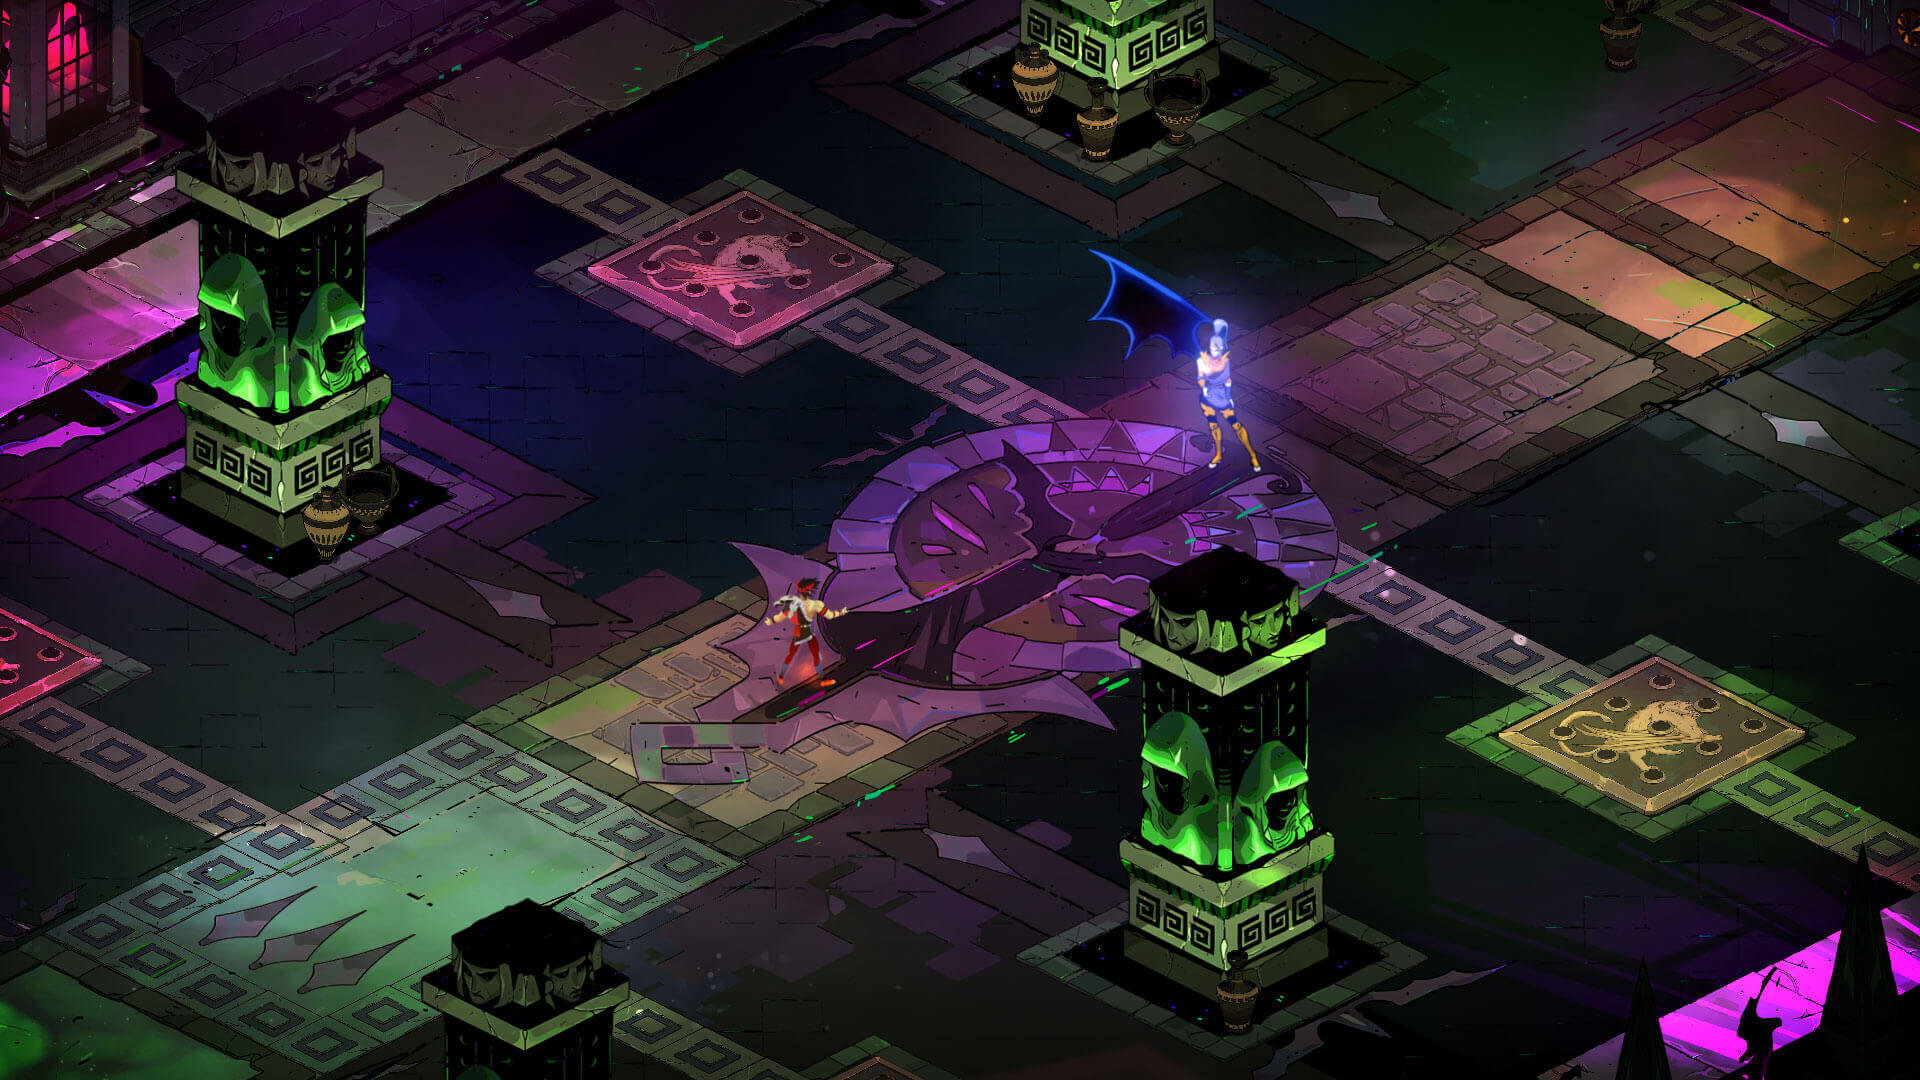 Stylish PC roguelike 'Hades' heads to Switch this fall